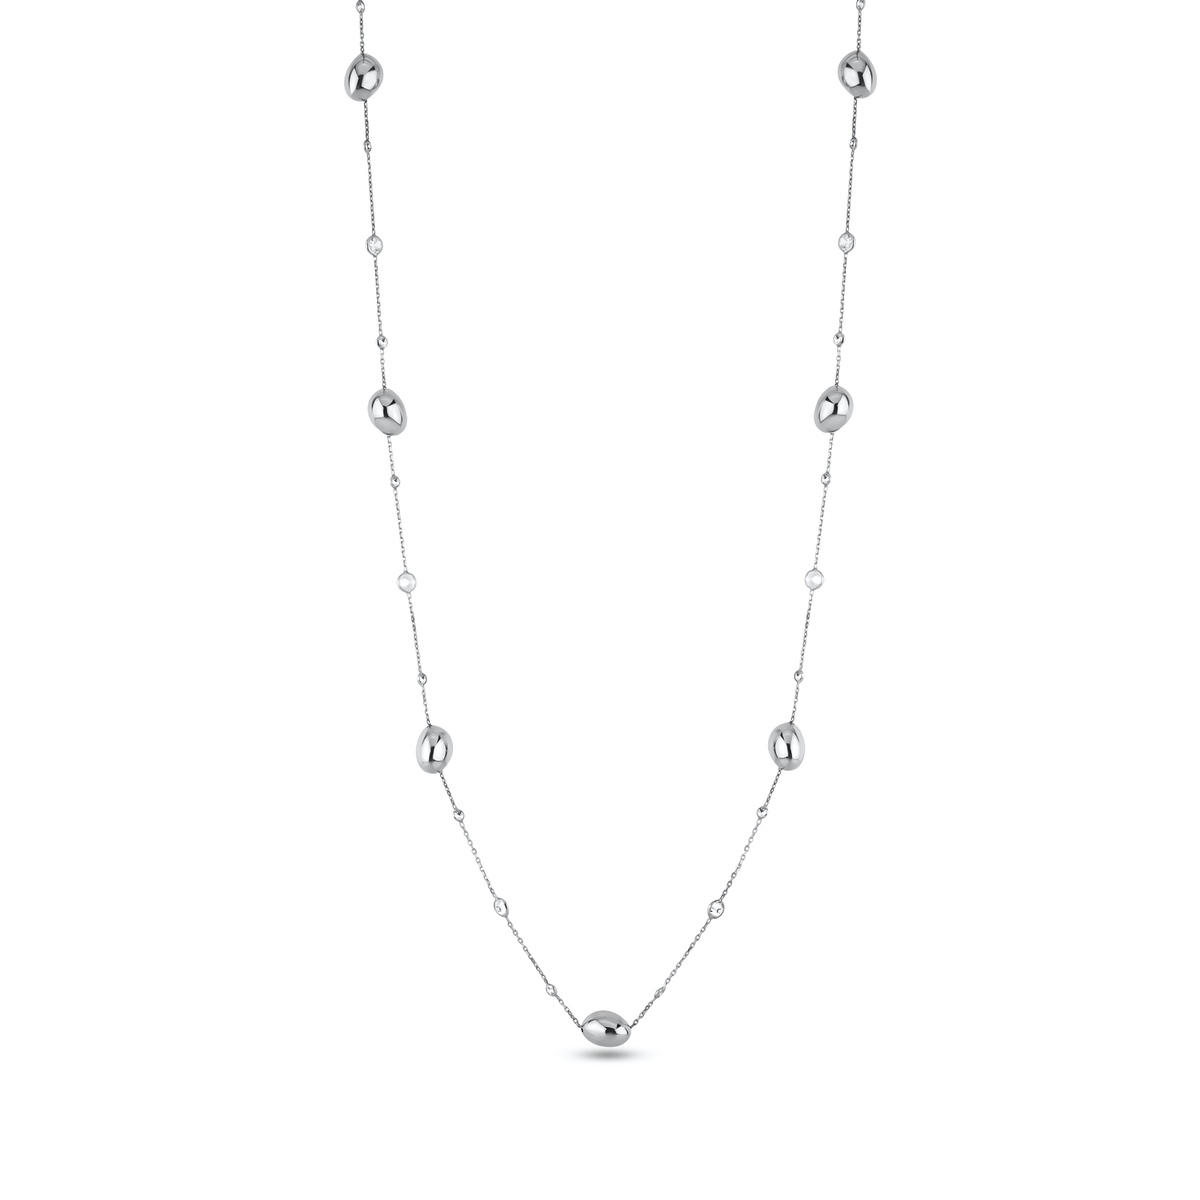 Silver Necklace Long Design Zircon Stone 925 Sterling